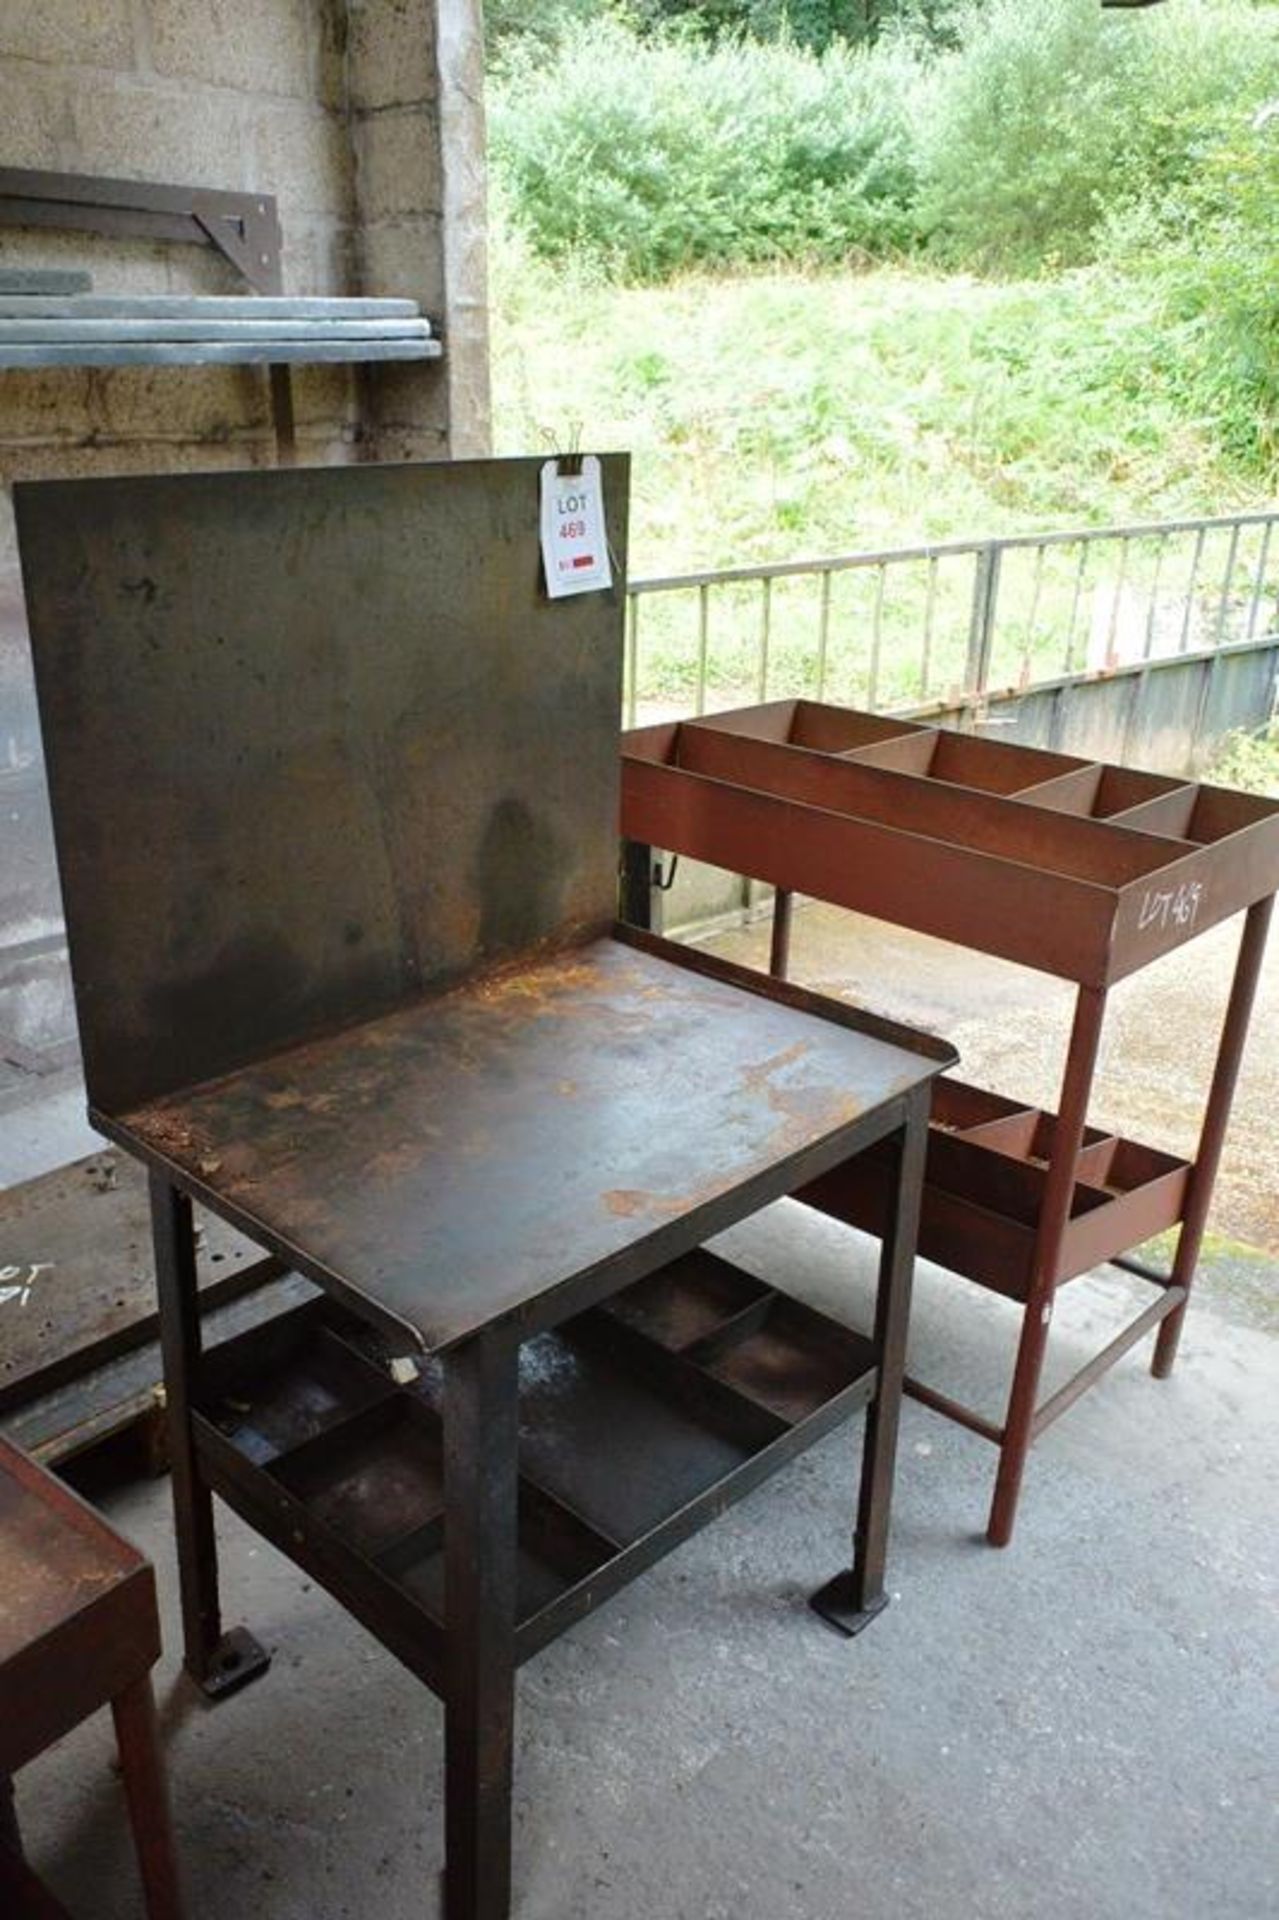 Two various steel frame tables (Recommended collection period for this lot Wednesday 15th - Friday